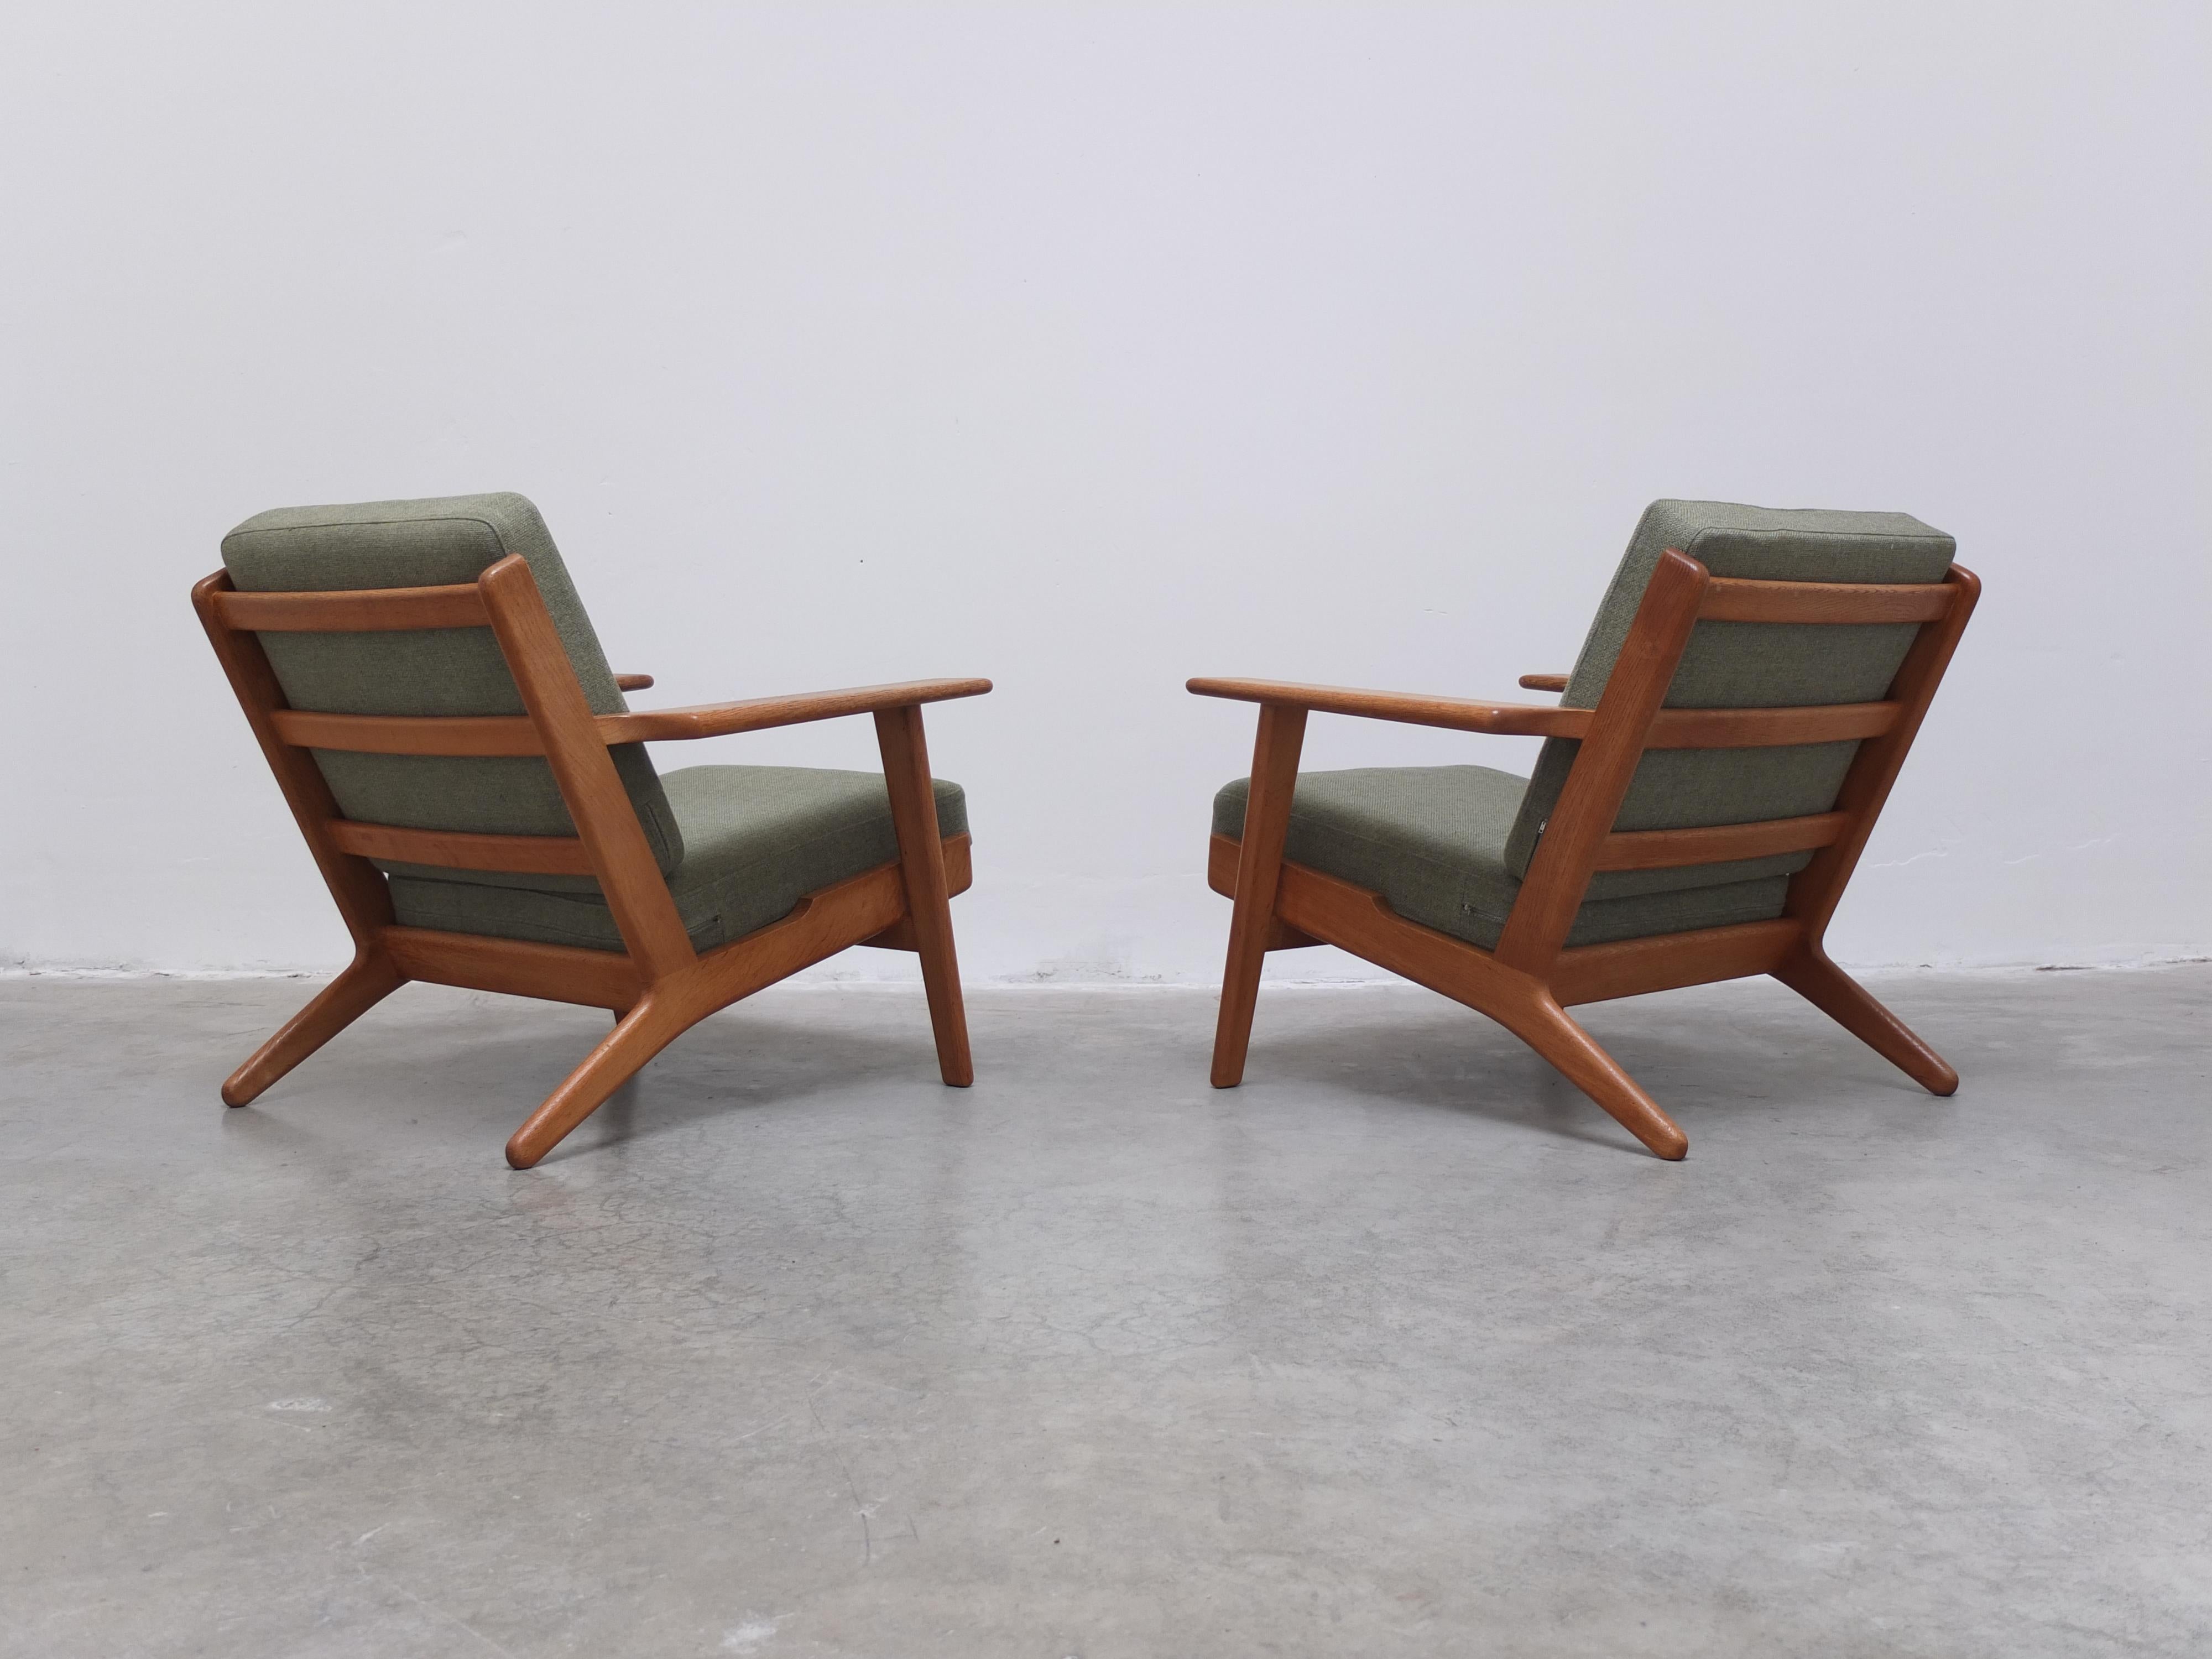 Early Pair of Oak 'GE-290' Lounge Chairs by Hans Wegner for Getama, 1953 For Sale 7